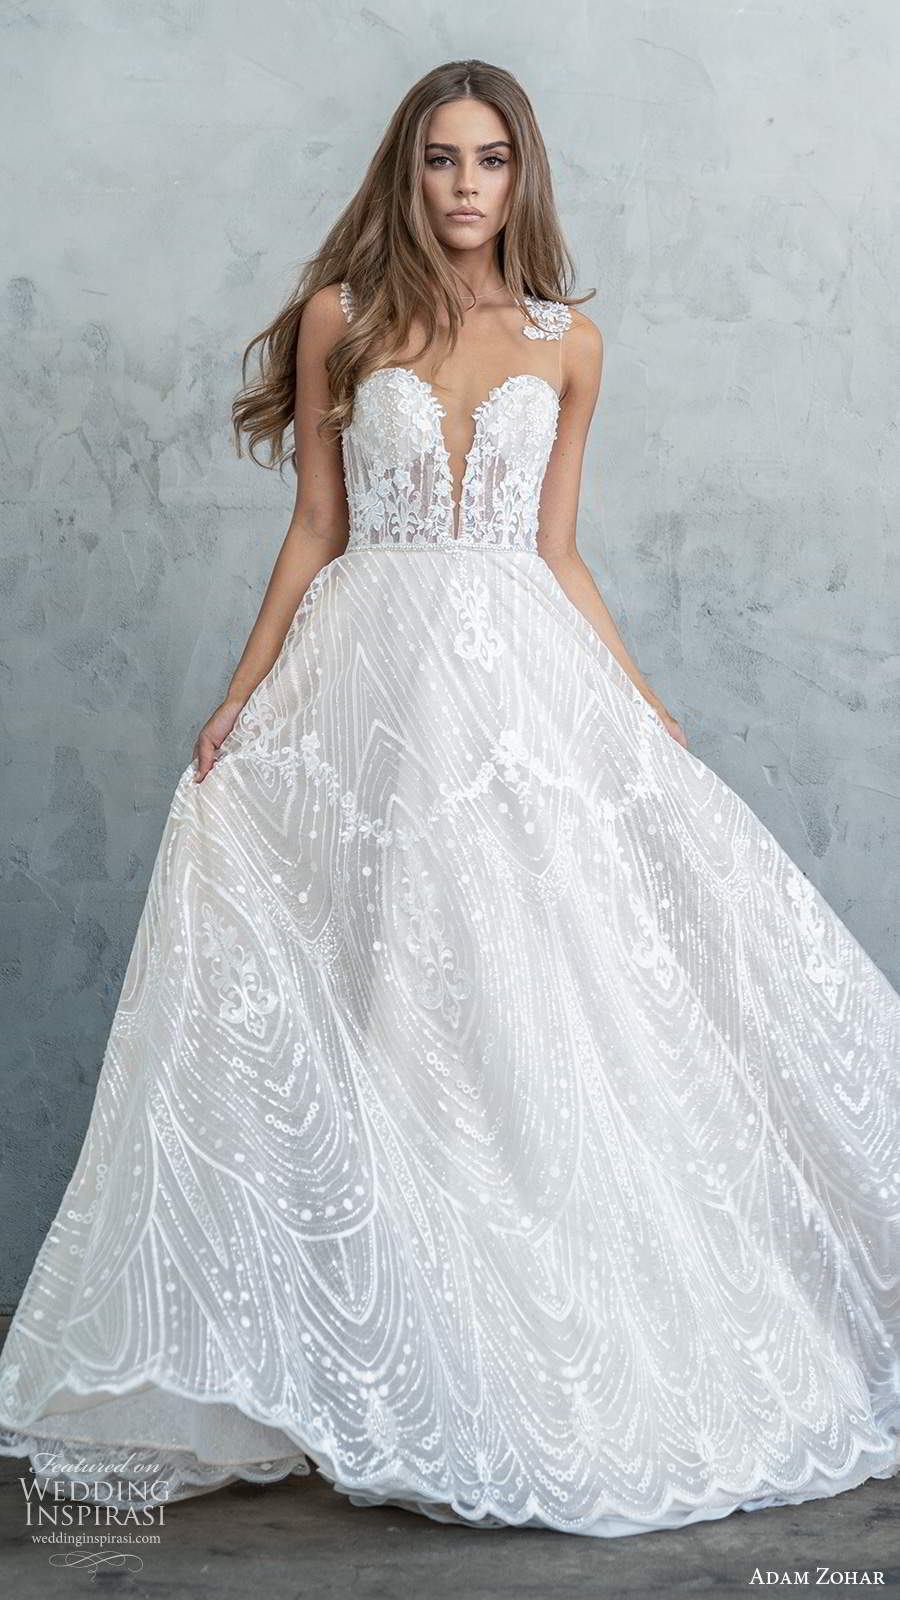 adam zohar fall 2020 bridal sleeveless illusion jewel neck plunging sweetheart neckline fully embellished lace a line ball gown wedding dress sheer back chapel train (5) mv